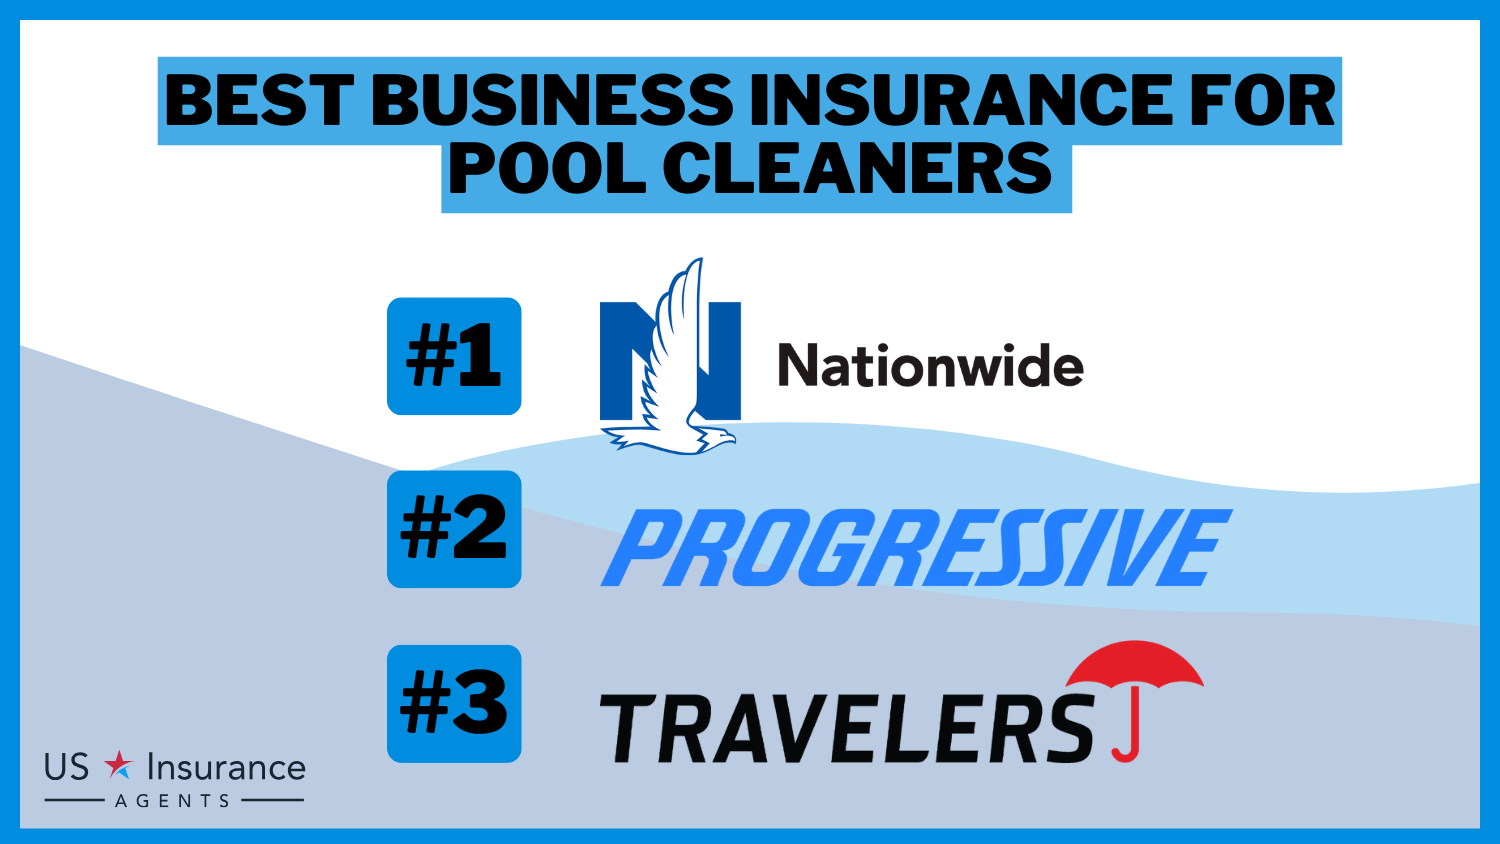 3 Best Business Insurance for Pool Cleaners: Nationwide, Progressive, and Travelers.